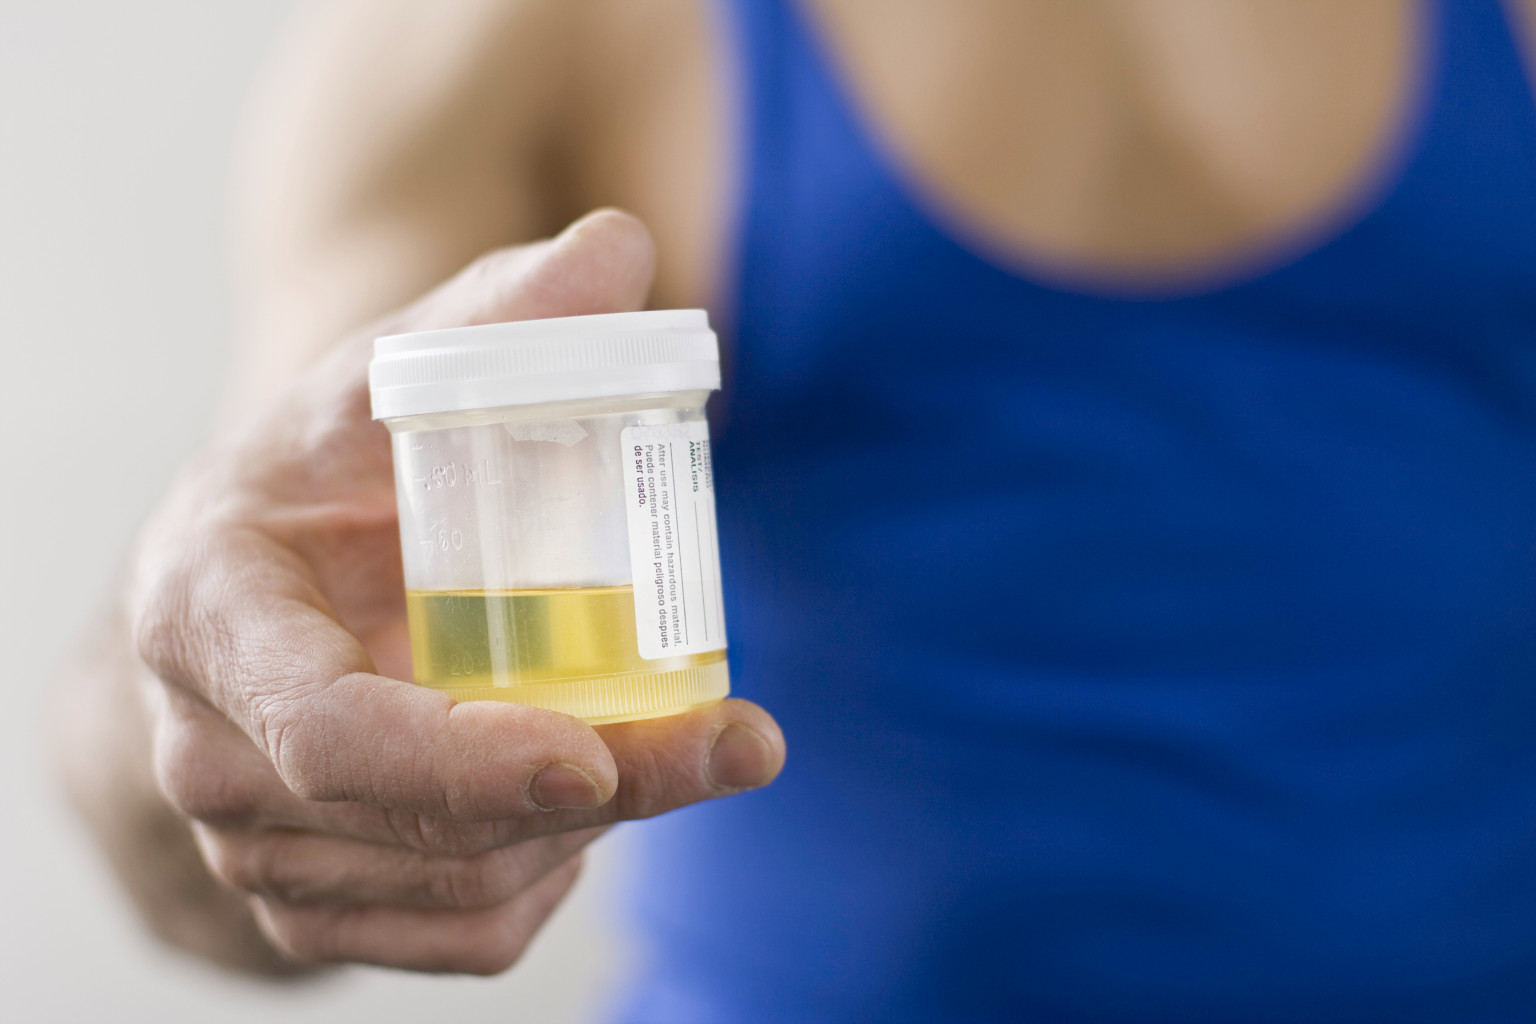 pee color says about health